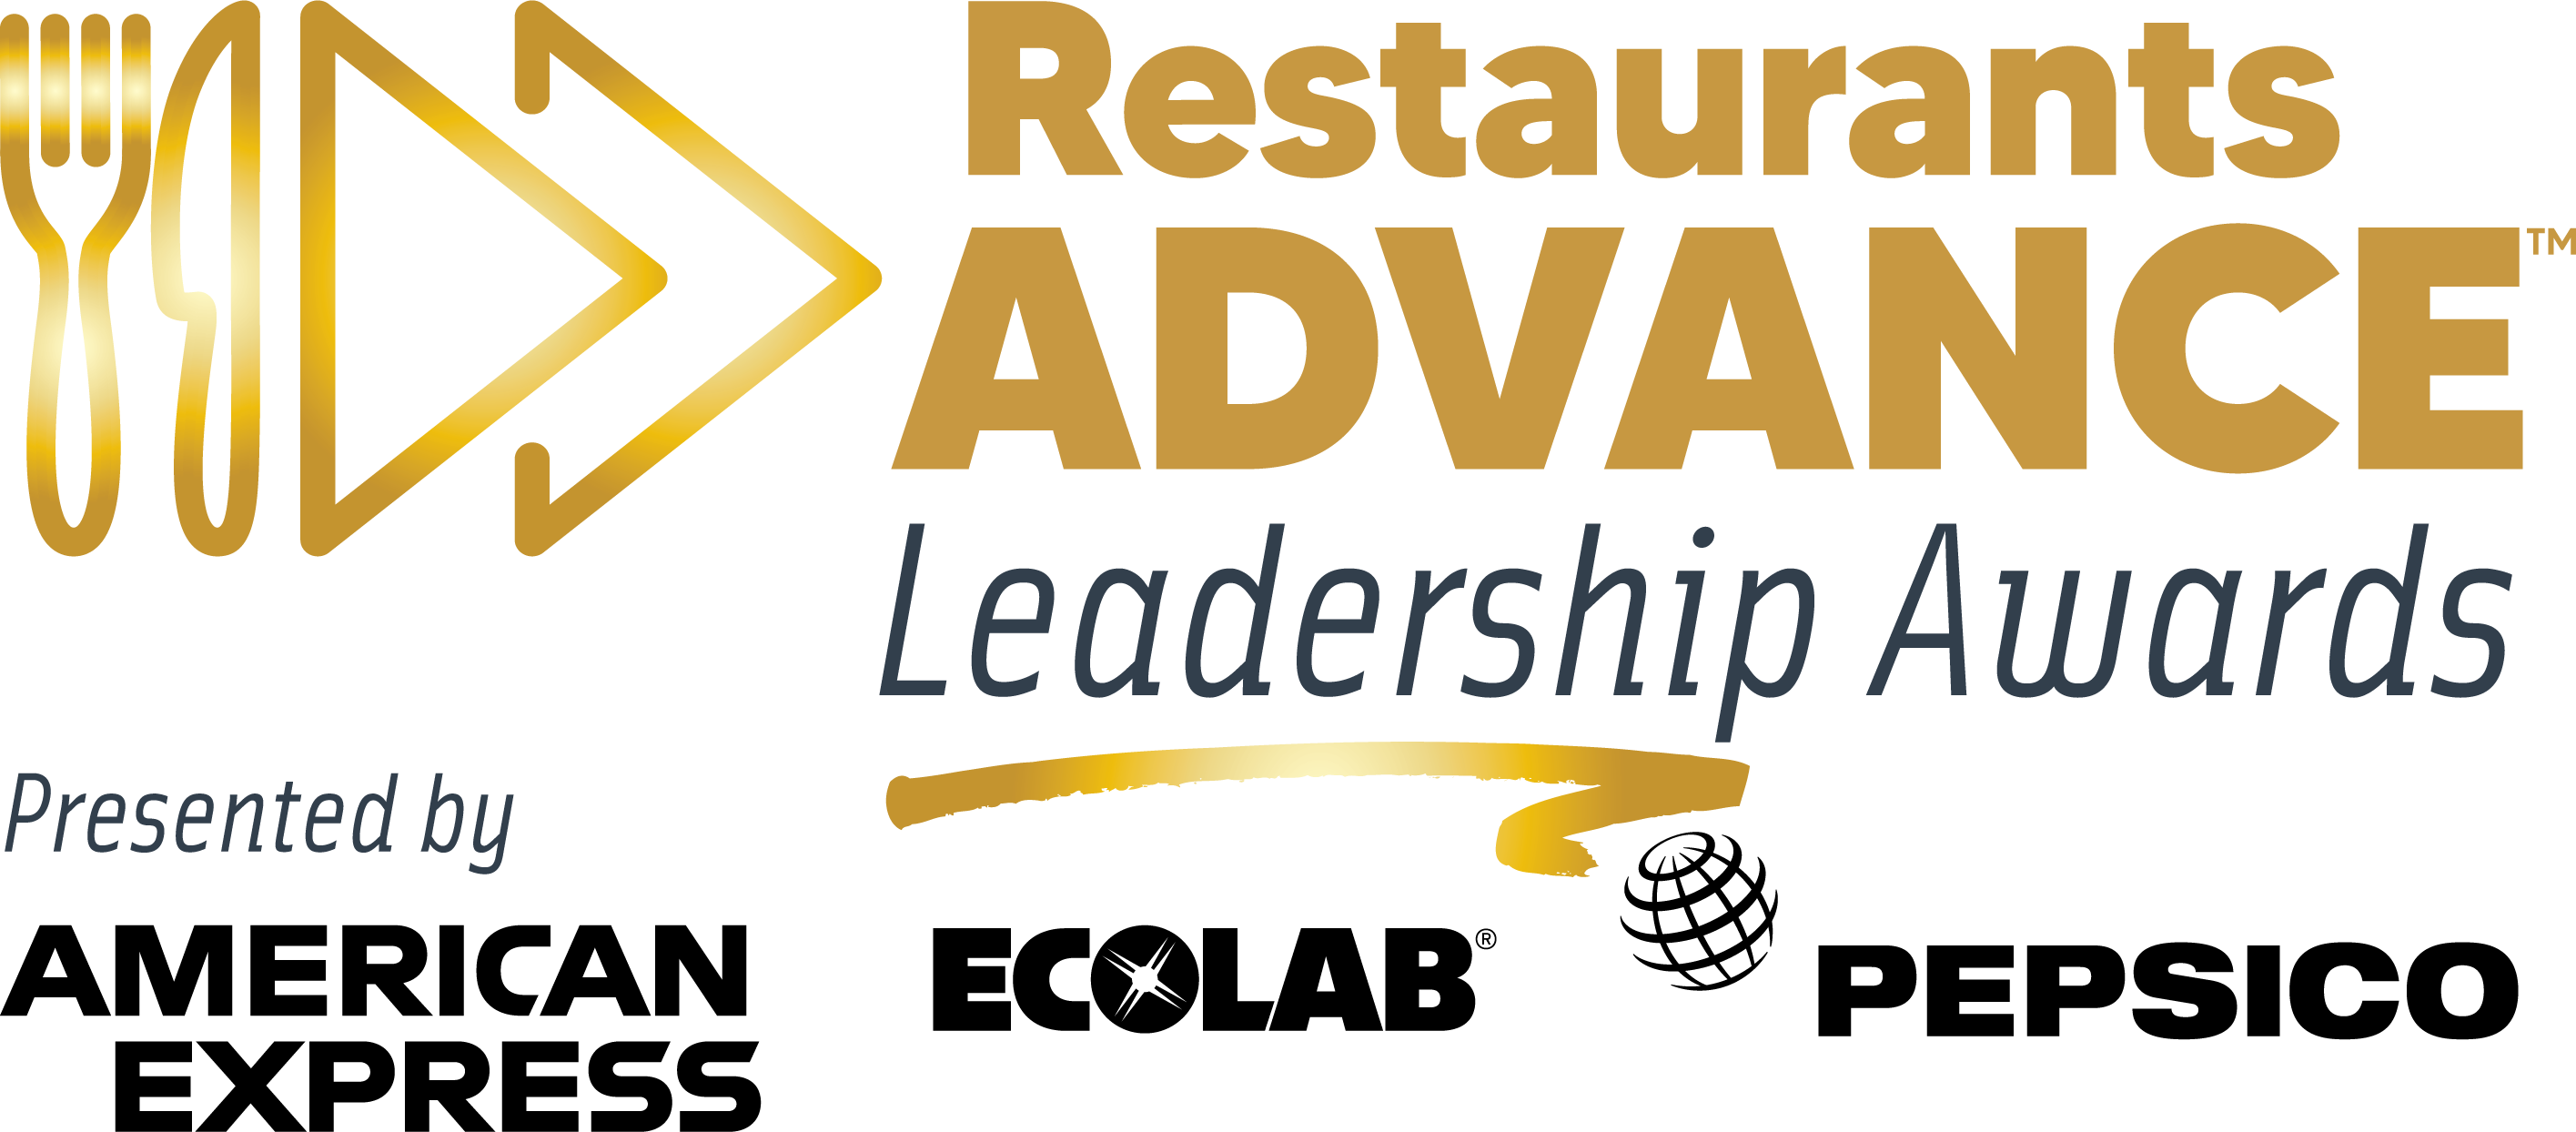 Restaurants Advance Leadership awards presented by American Express, Ecolab, and PepsiCo logo